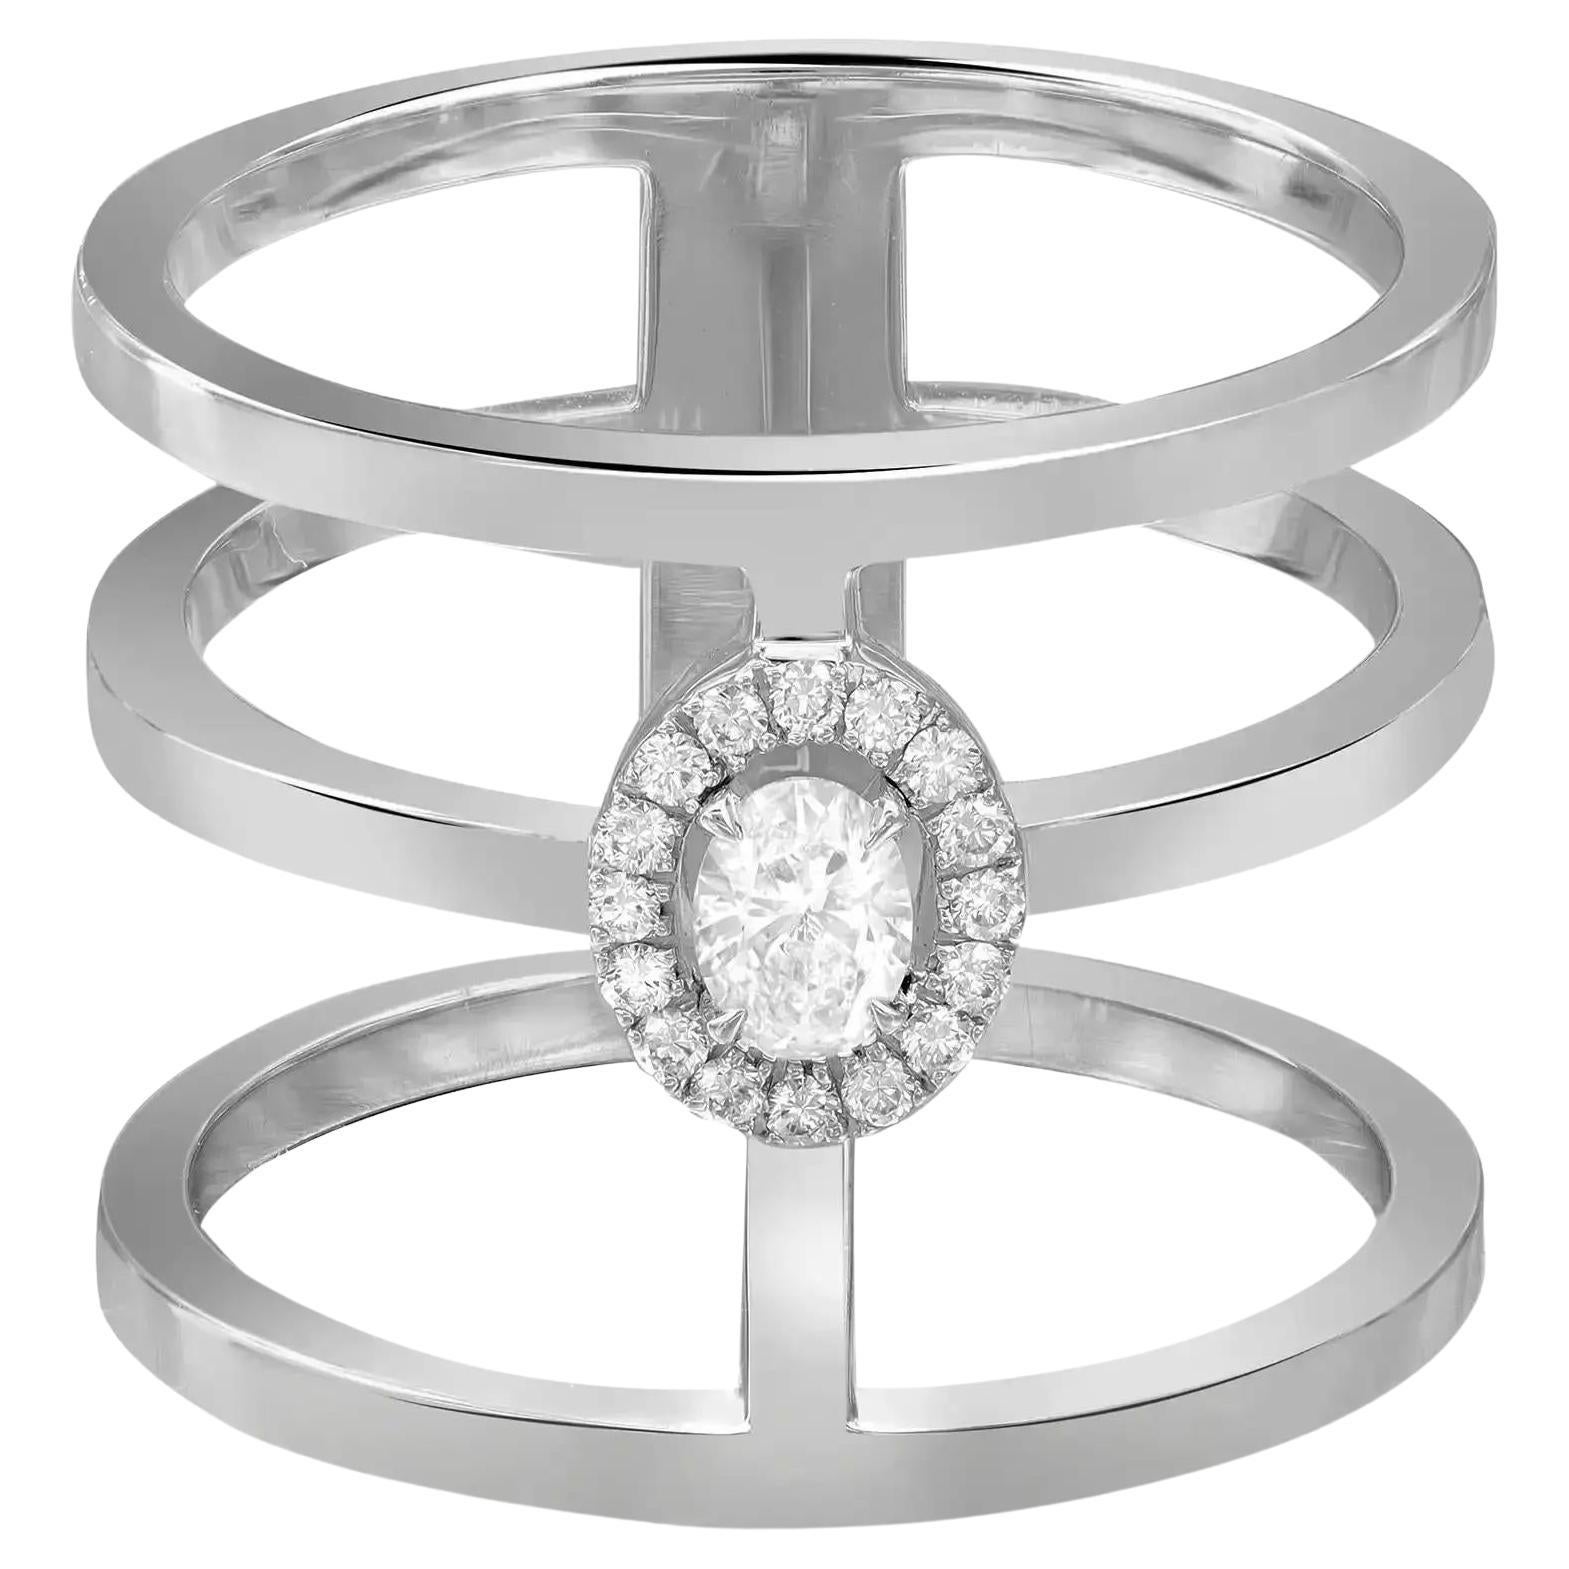 Messika 0.22Ctw Glam'Azone 3 Row Diamond Band Ring 18K White Gold SZ 53 US 6.5   For Sale